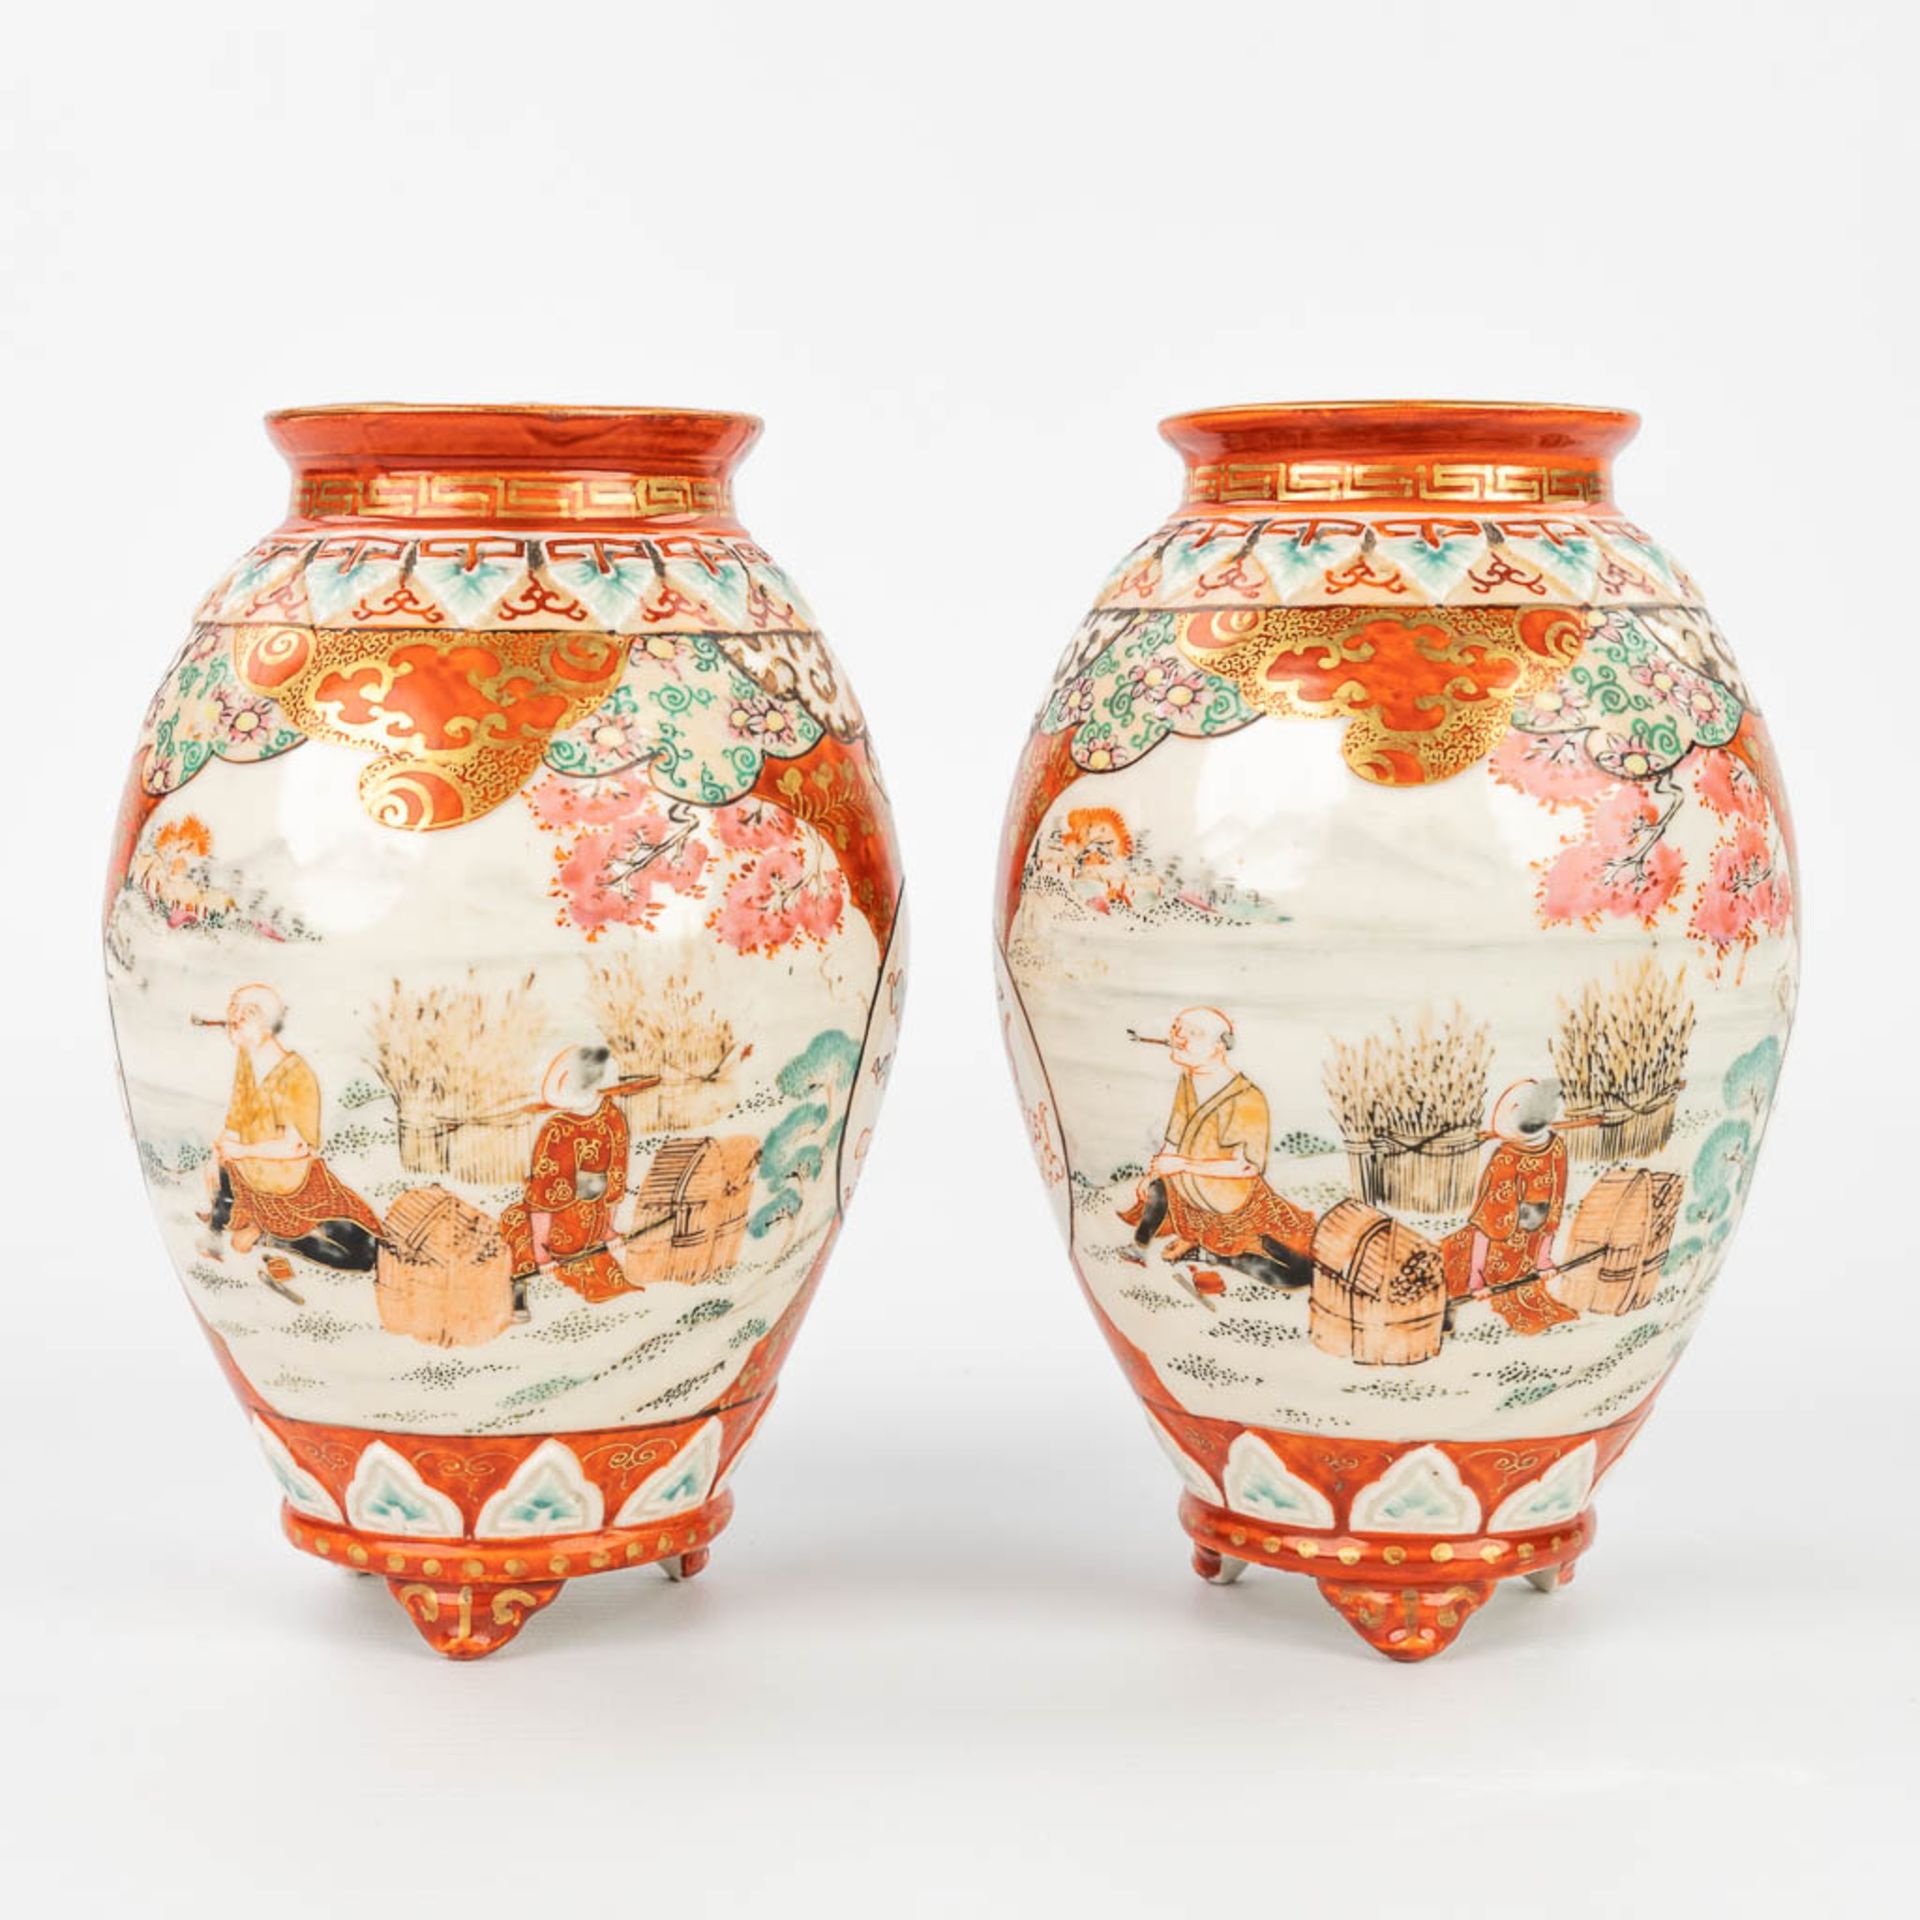 A pair of small vases made of stoneware with Kutani decor, made in Japan. (H:17cm)